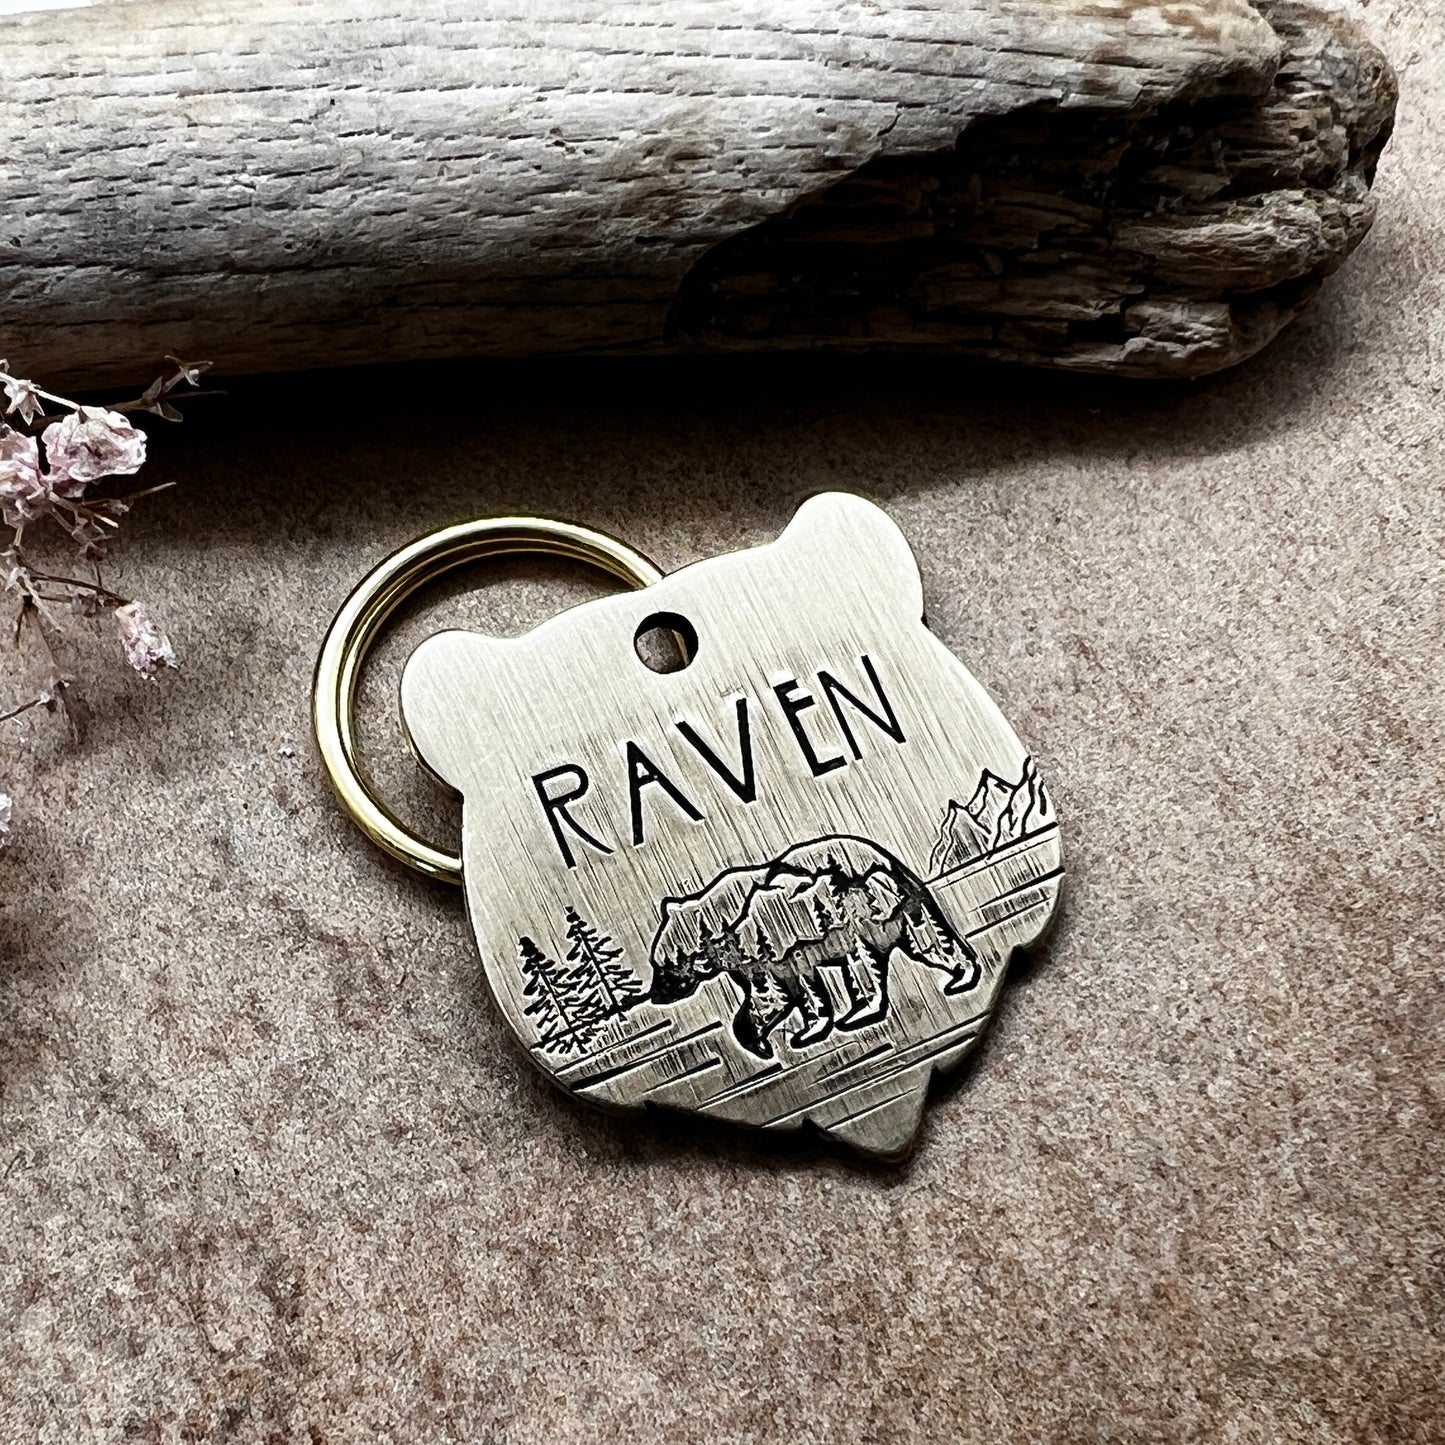 ELEMENTS design your own pet tag • Bear head 28mm